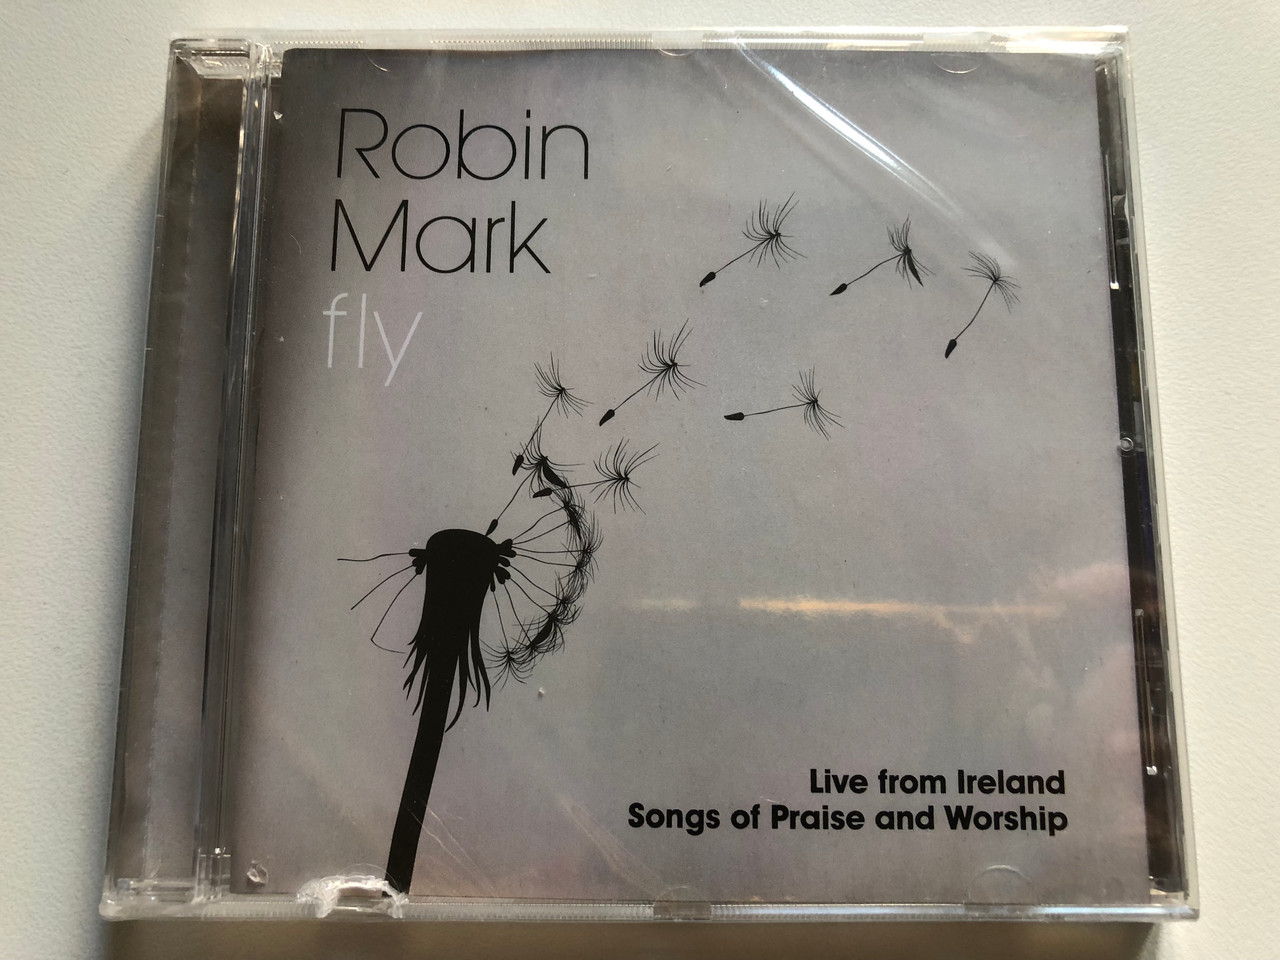 https://cdn11.bigcommerce.com/s-62bdpkt7pb/products/0/images/321651/Robin_Mark_Fly_Live_From_Ireland_Songs_Of_Praise_And_Worship_inciite_Audio_CD_2011_878207007128_1__68850.1705335293.1280.1280.JPG?c=2